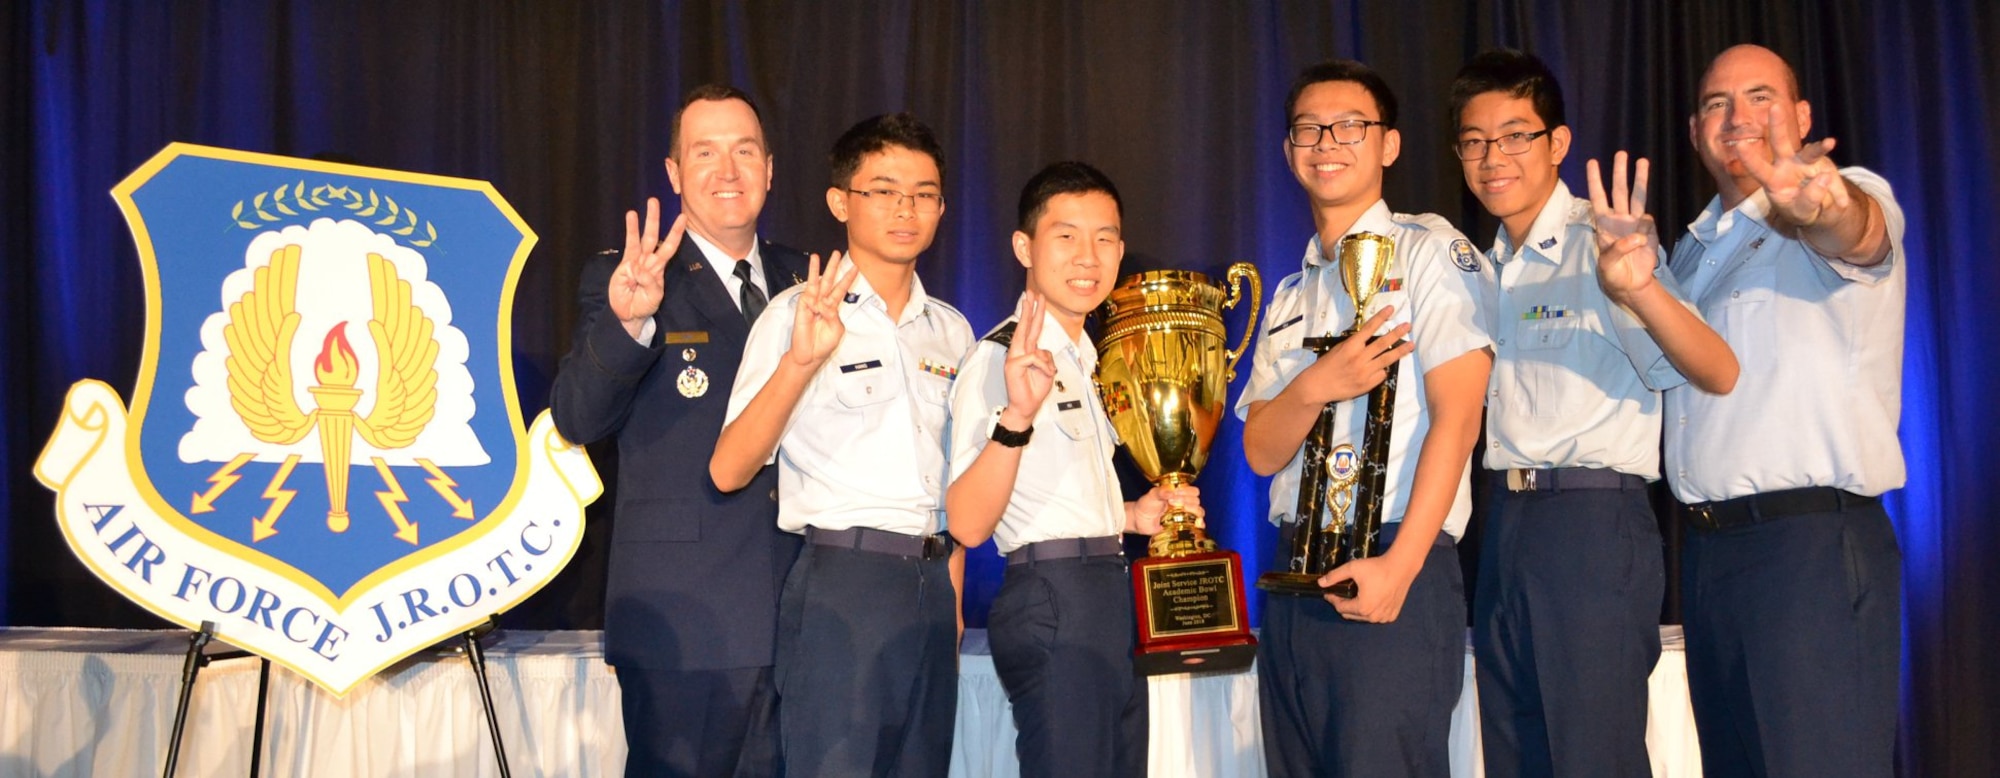 Air Force celebrates three-peat win at the Junior Reserve Officer Training Corps Leadership and Academic Bowl